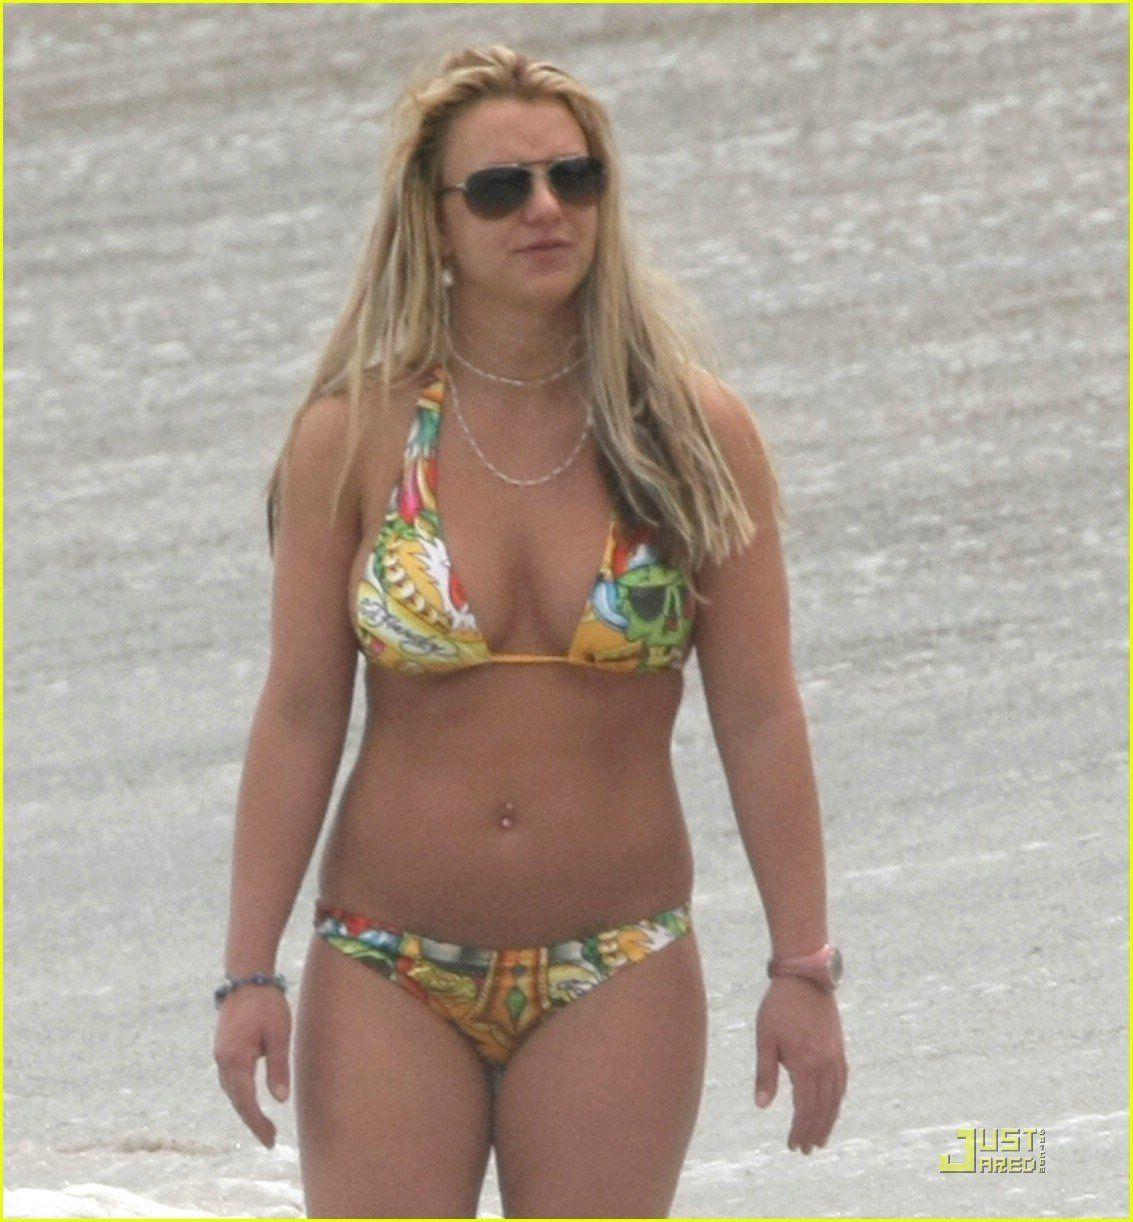 Brittany spears bikini pictures